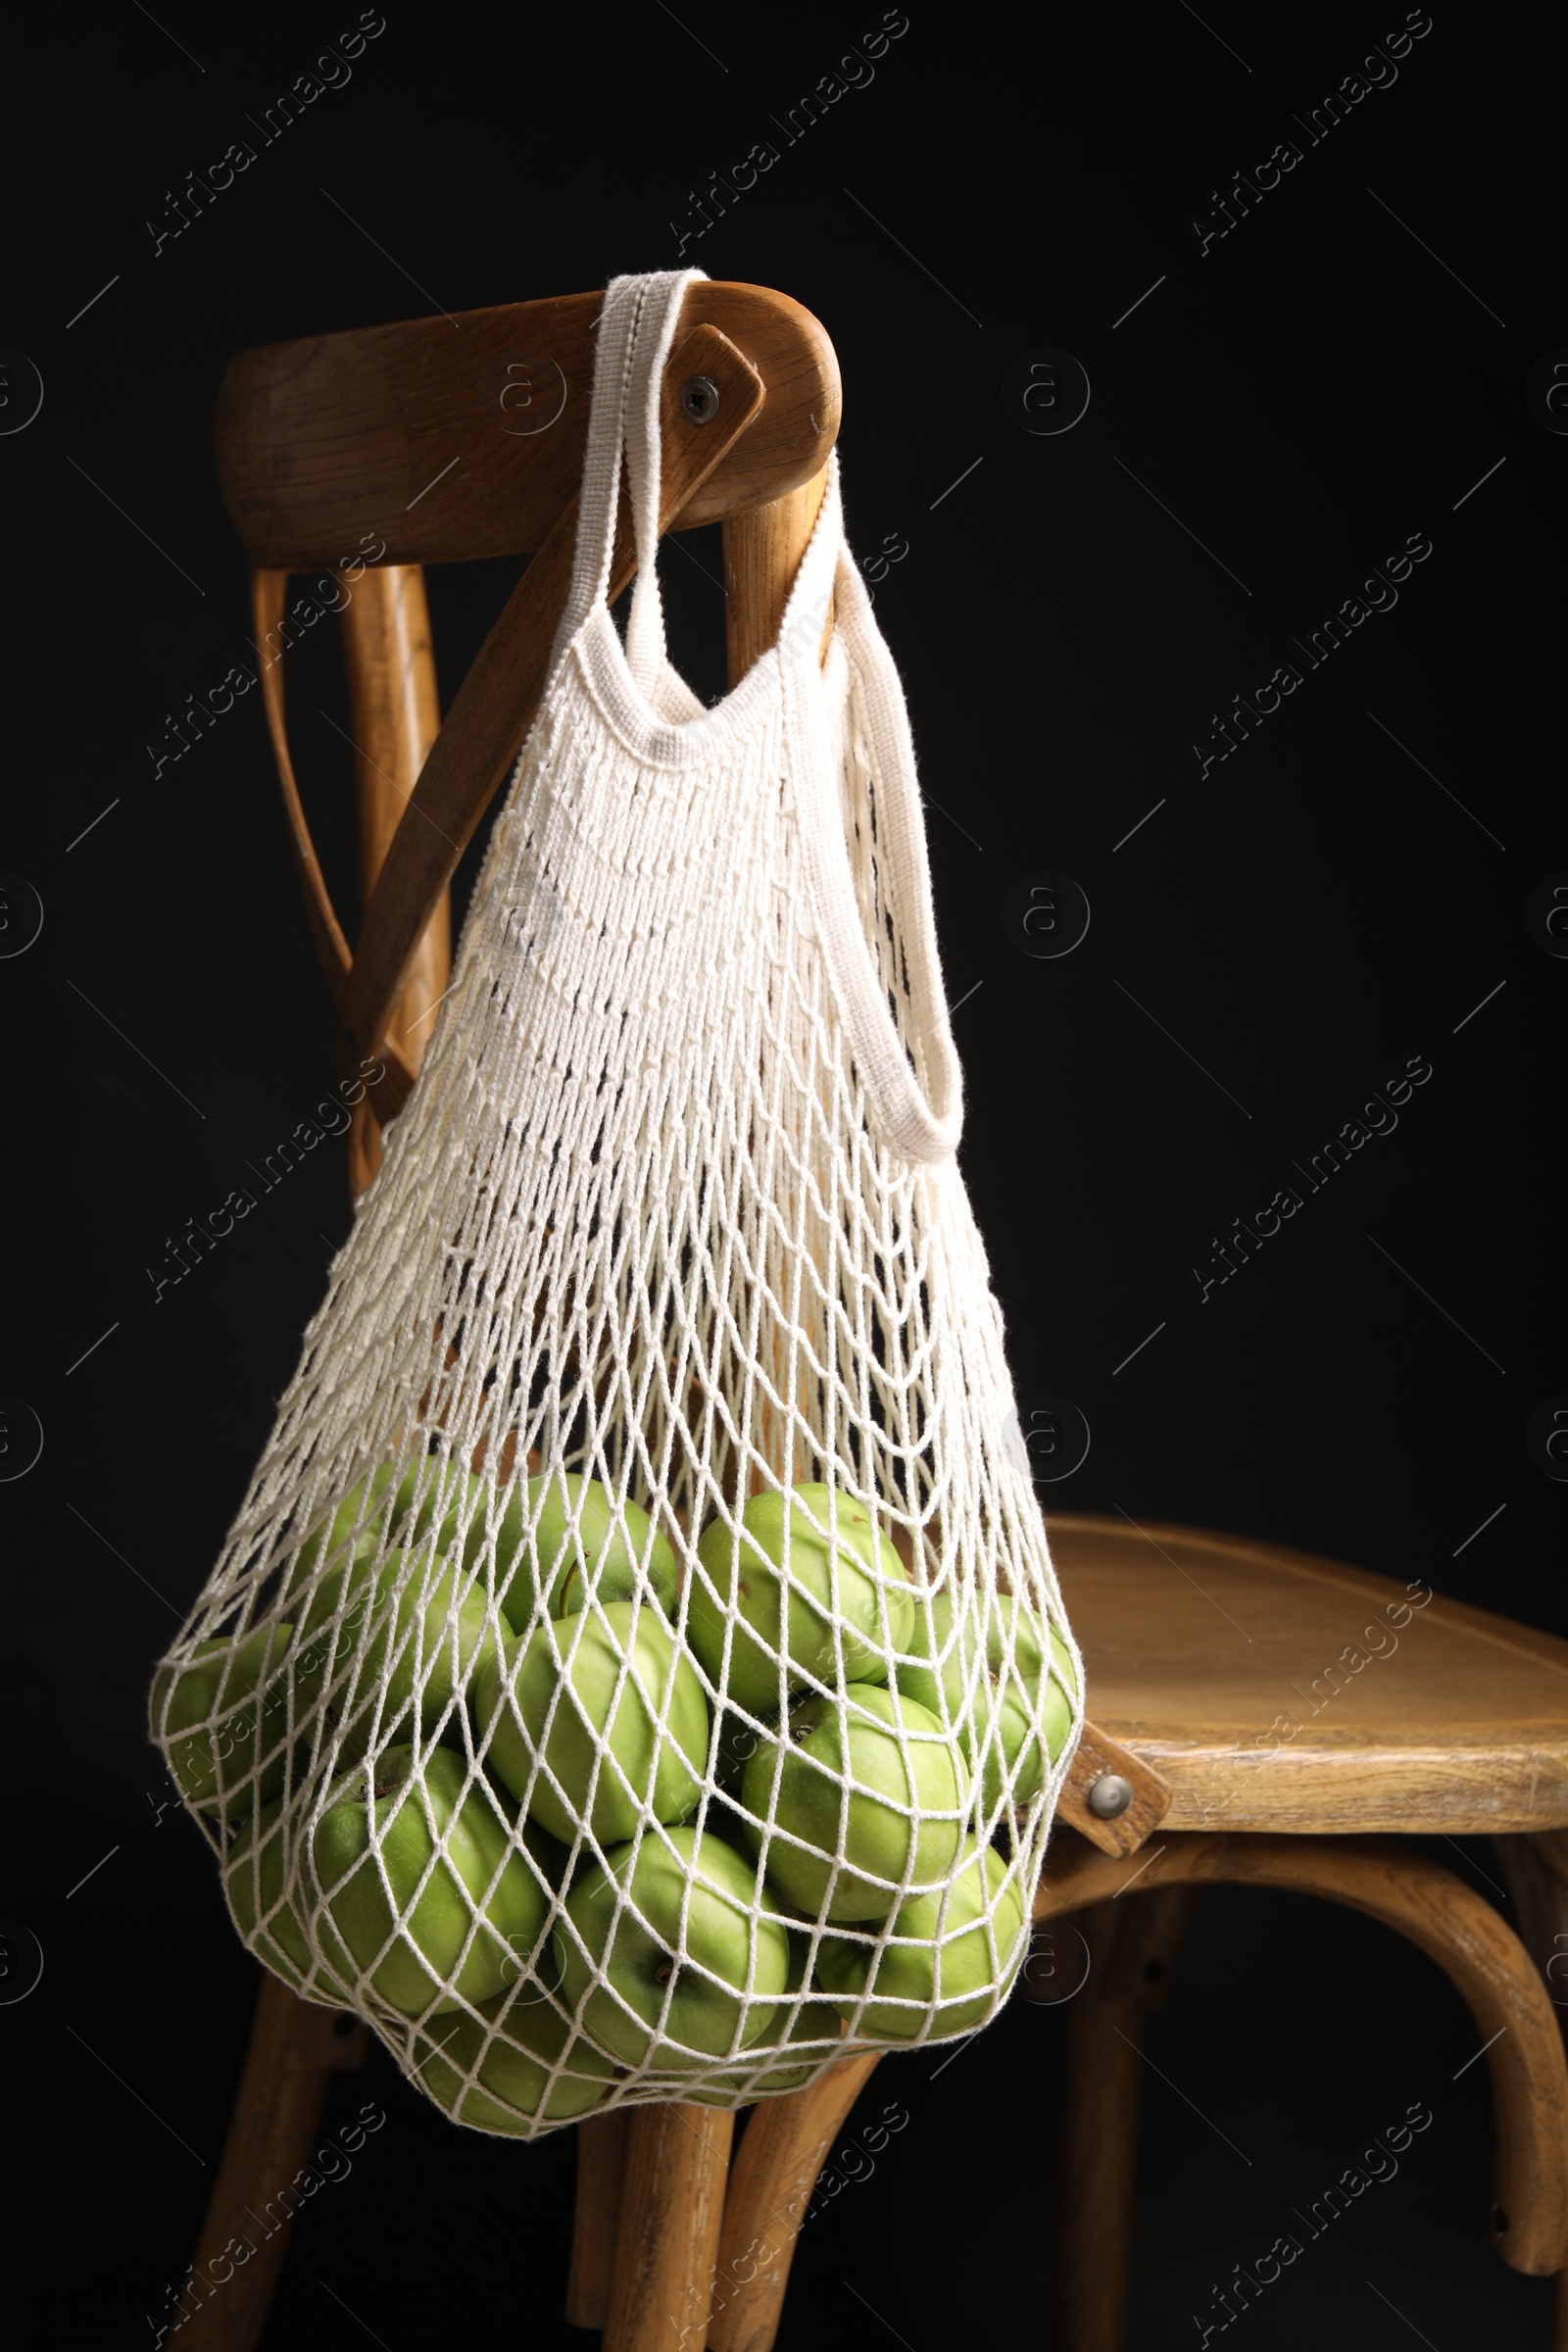 Photo of Green apples in net bag hanging on wooden chair against black background